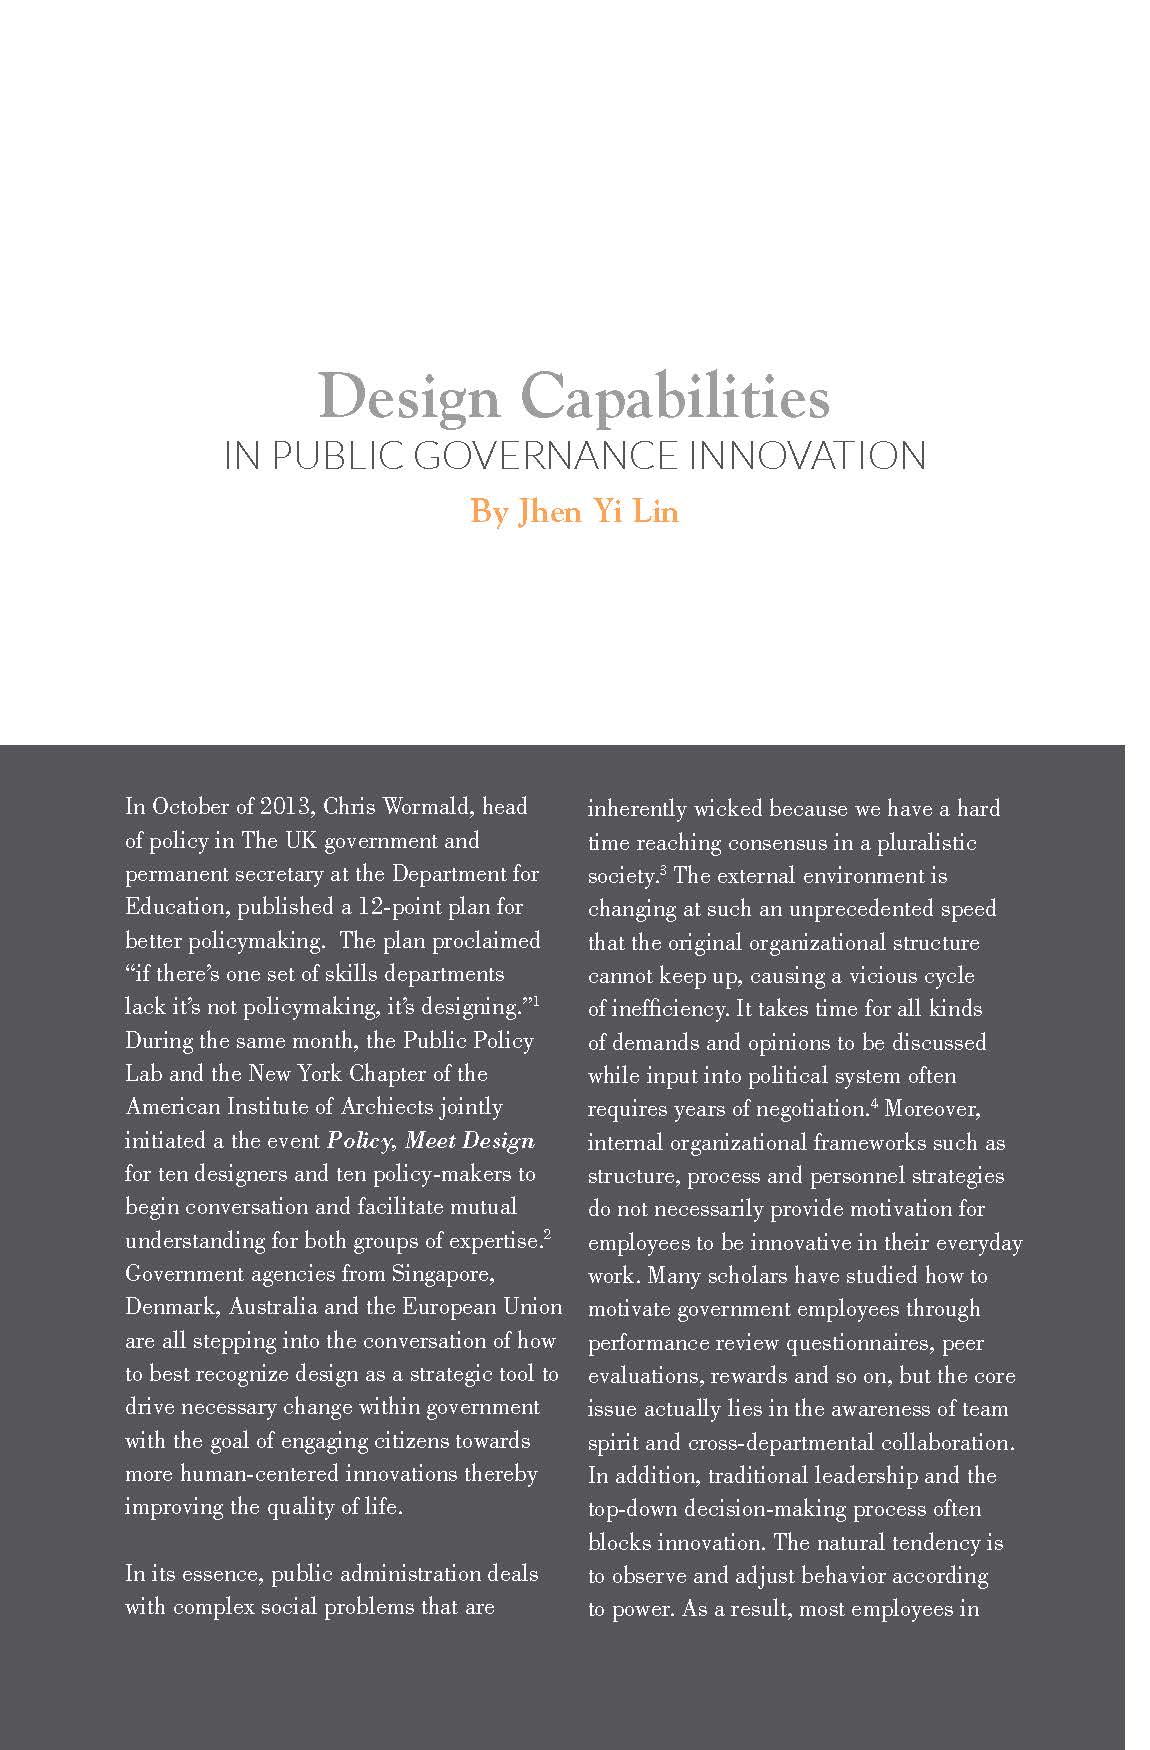 Design Capabilities IN PUBLIC GOVERNANCE INNOVATION_Page_1